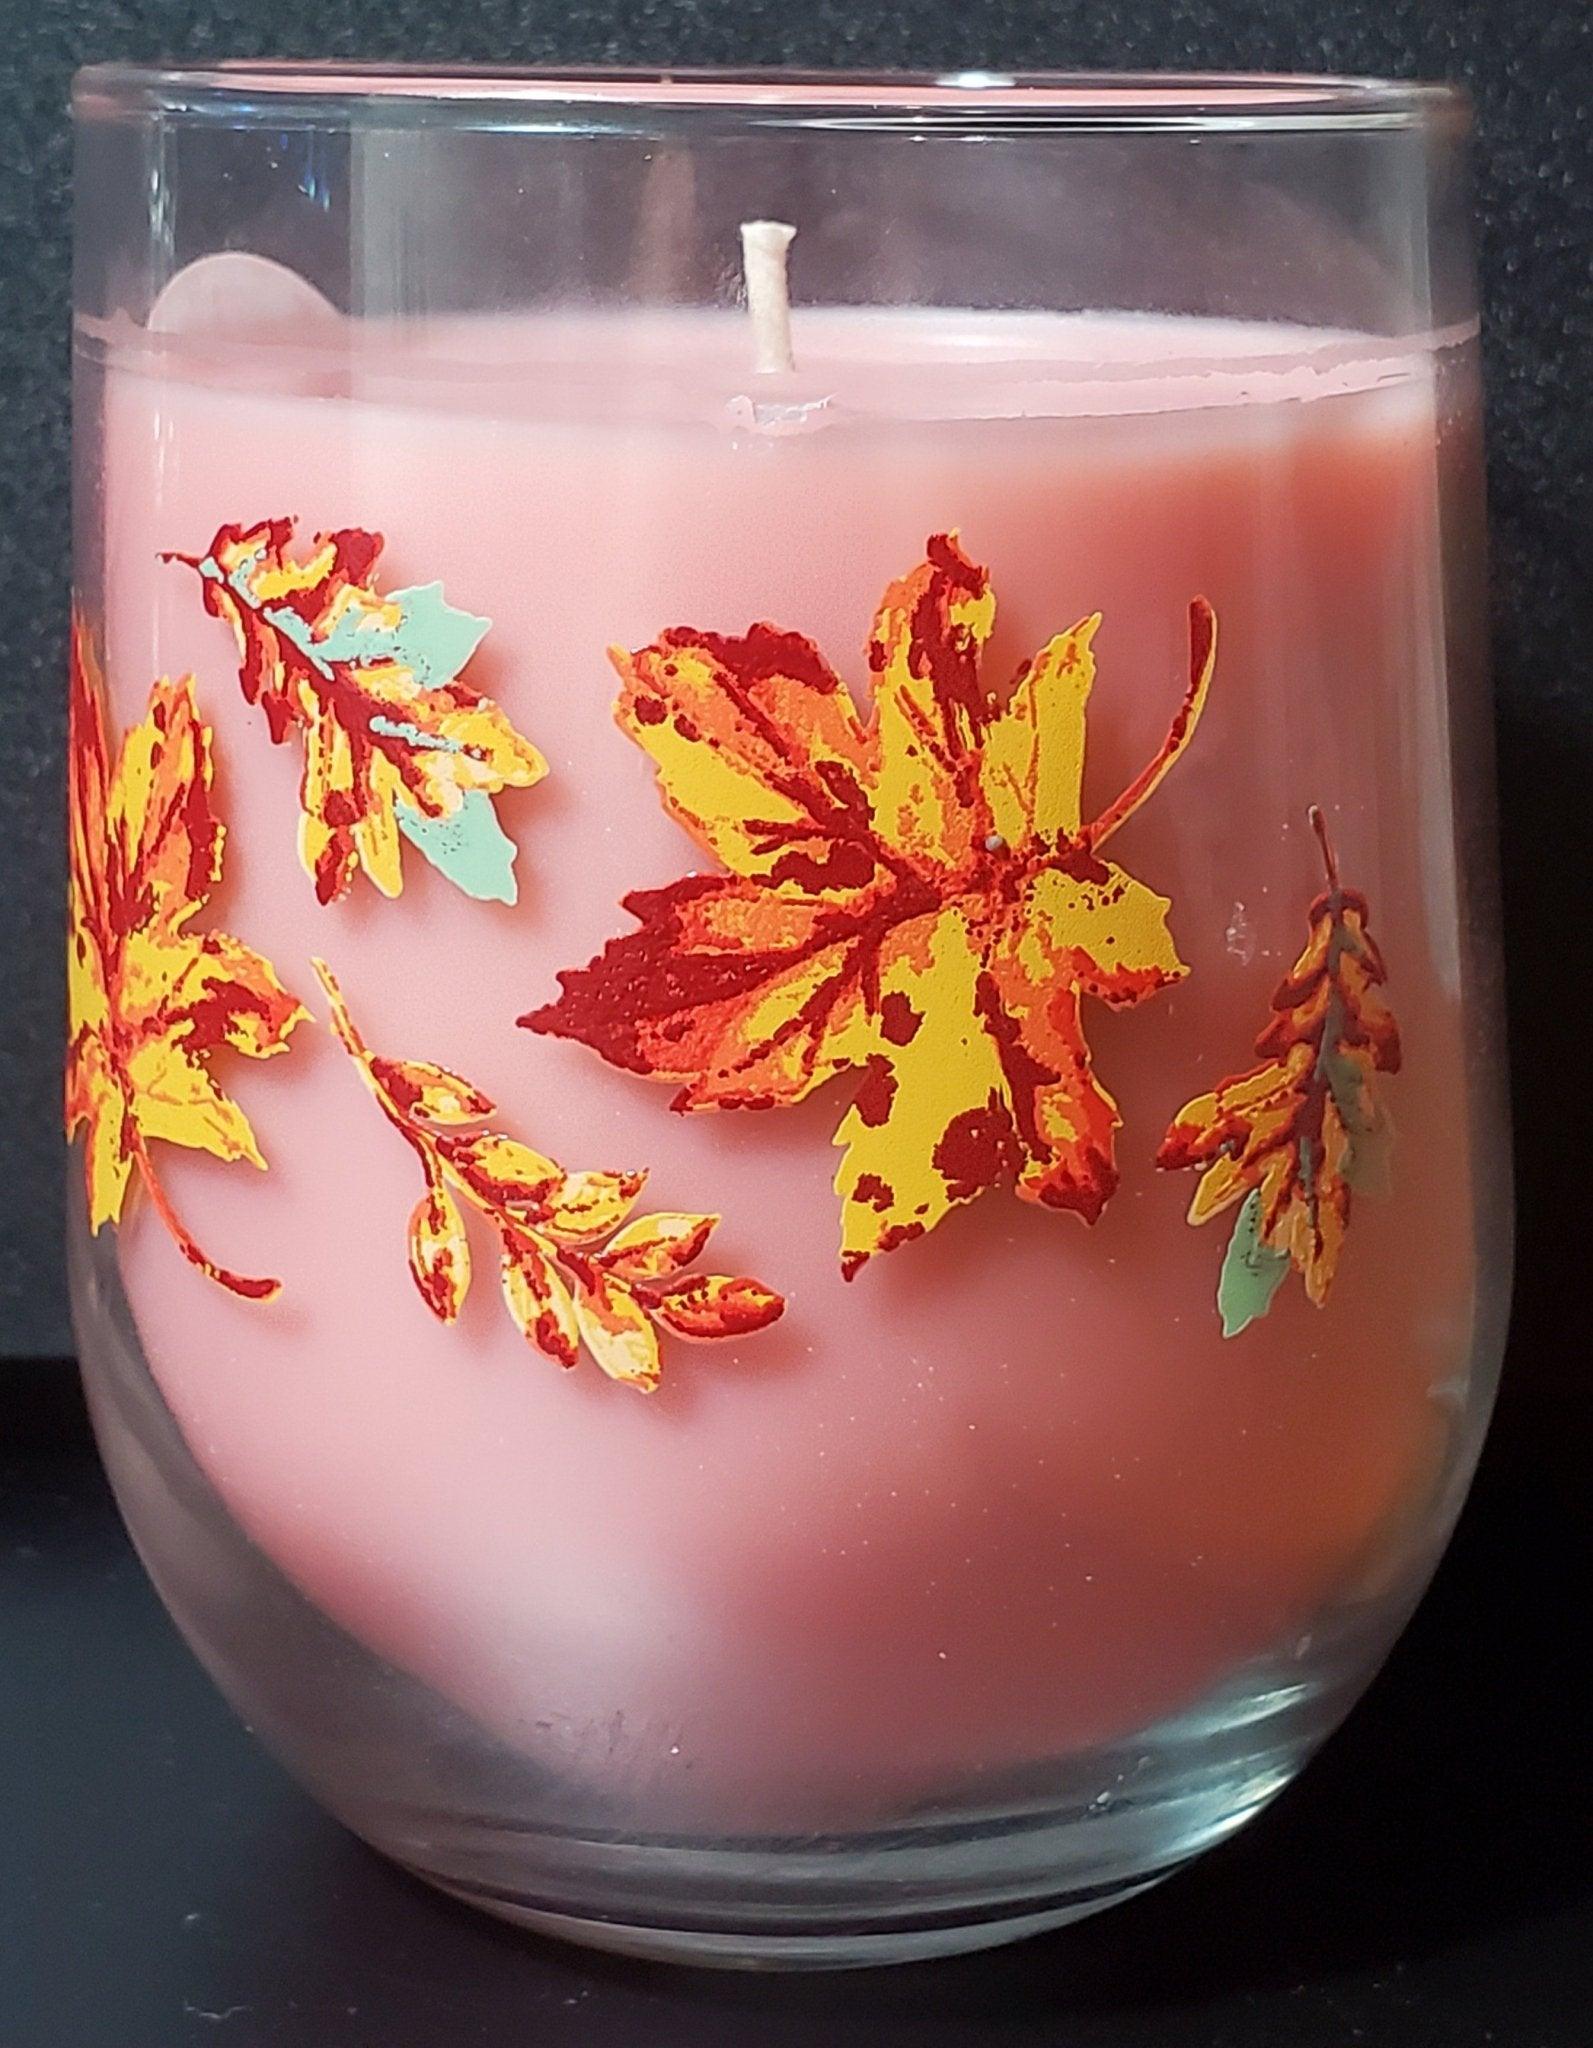 12oz. Wine Glass Candle - Delicious Cookies Stem Flamingwick Candles & Wax Melts   